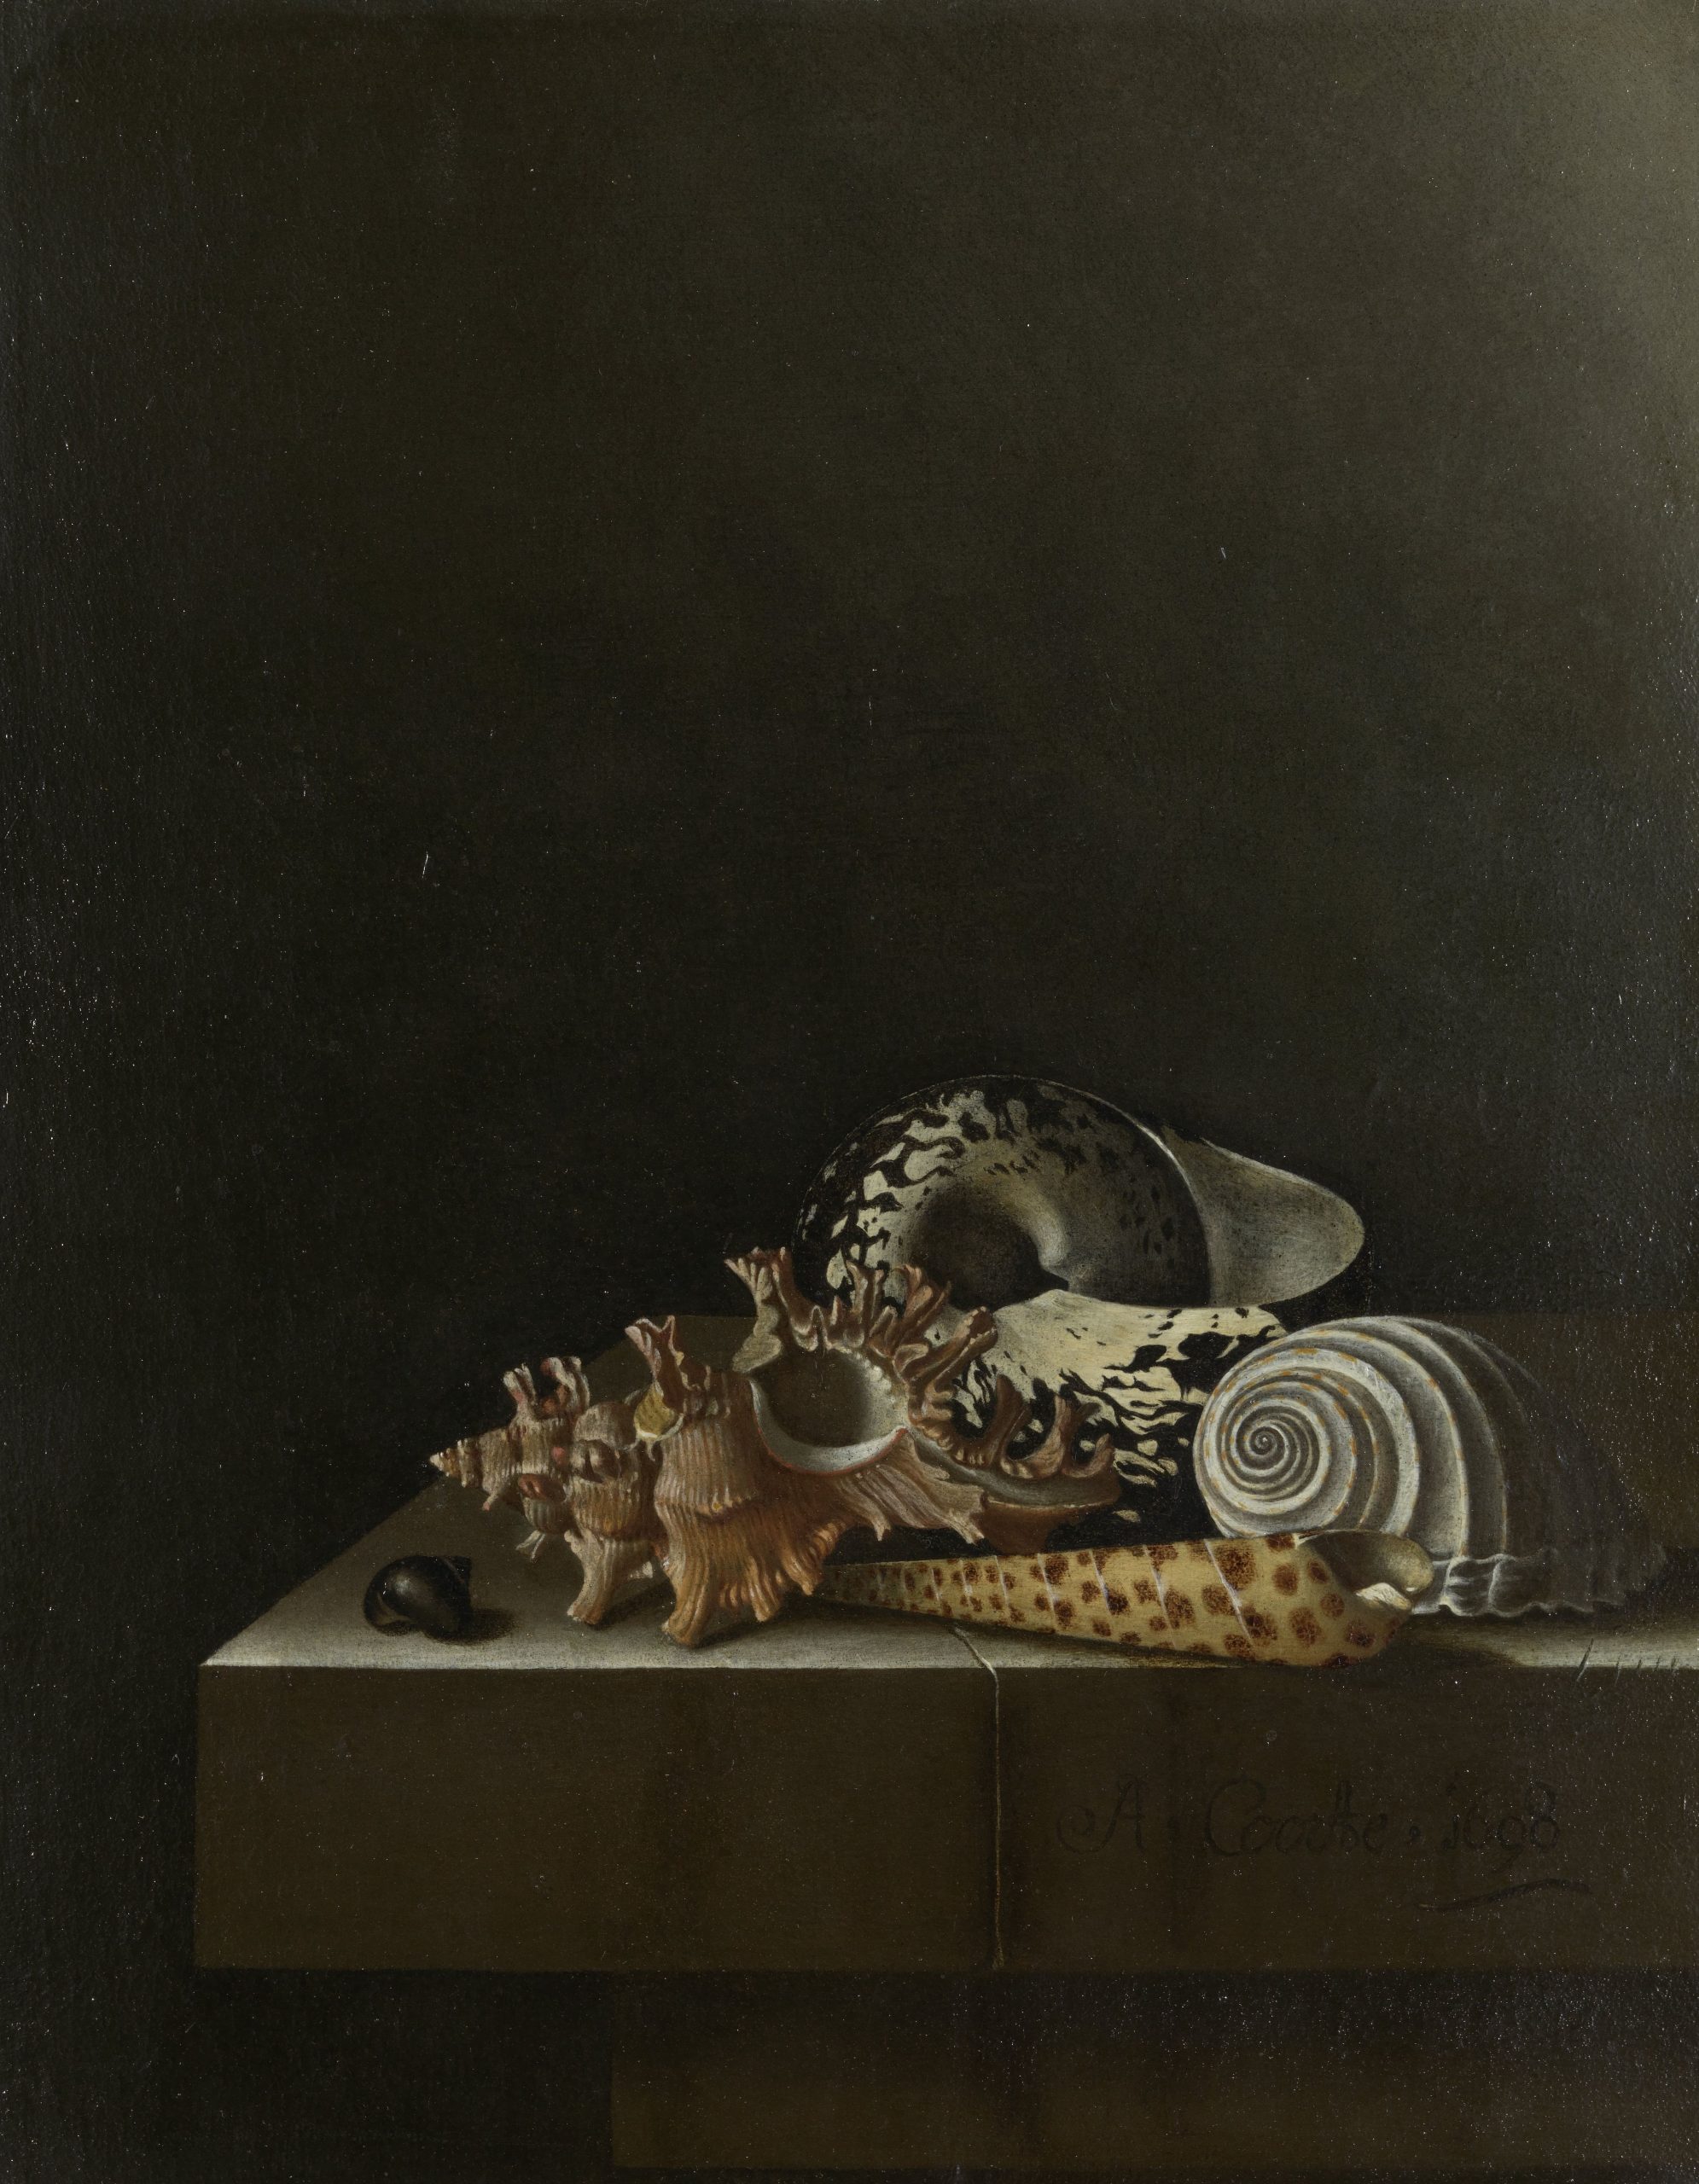 Adrienne Coorte
“Still Life with Shells”
Oil on paper on panel, 11×9 inches, 1698.